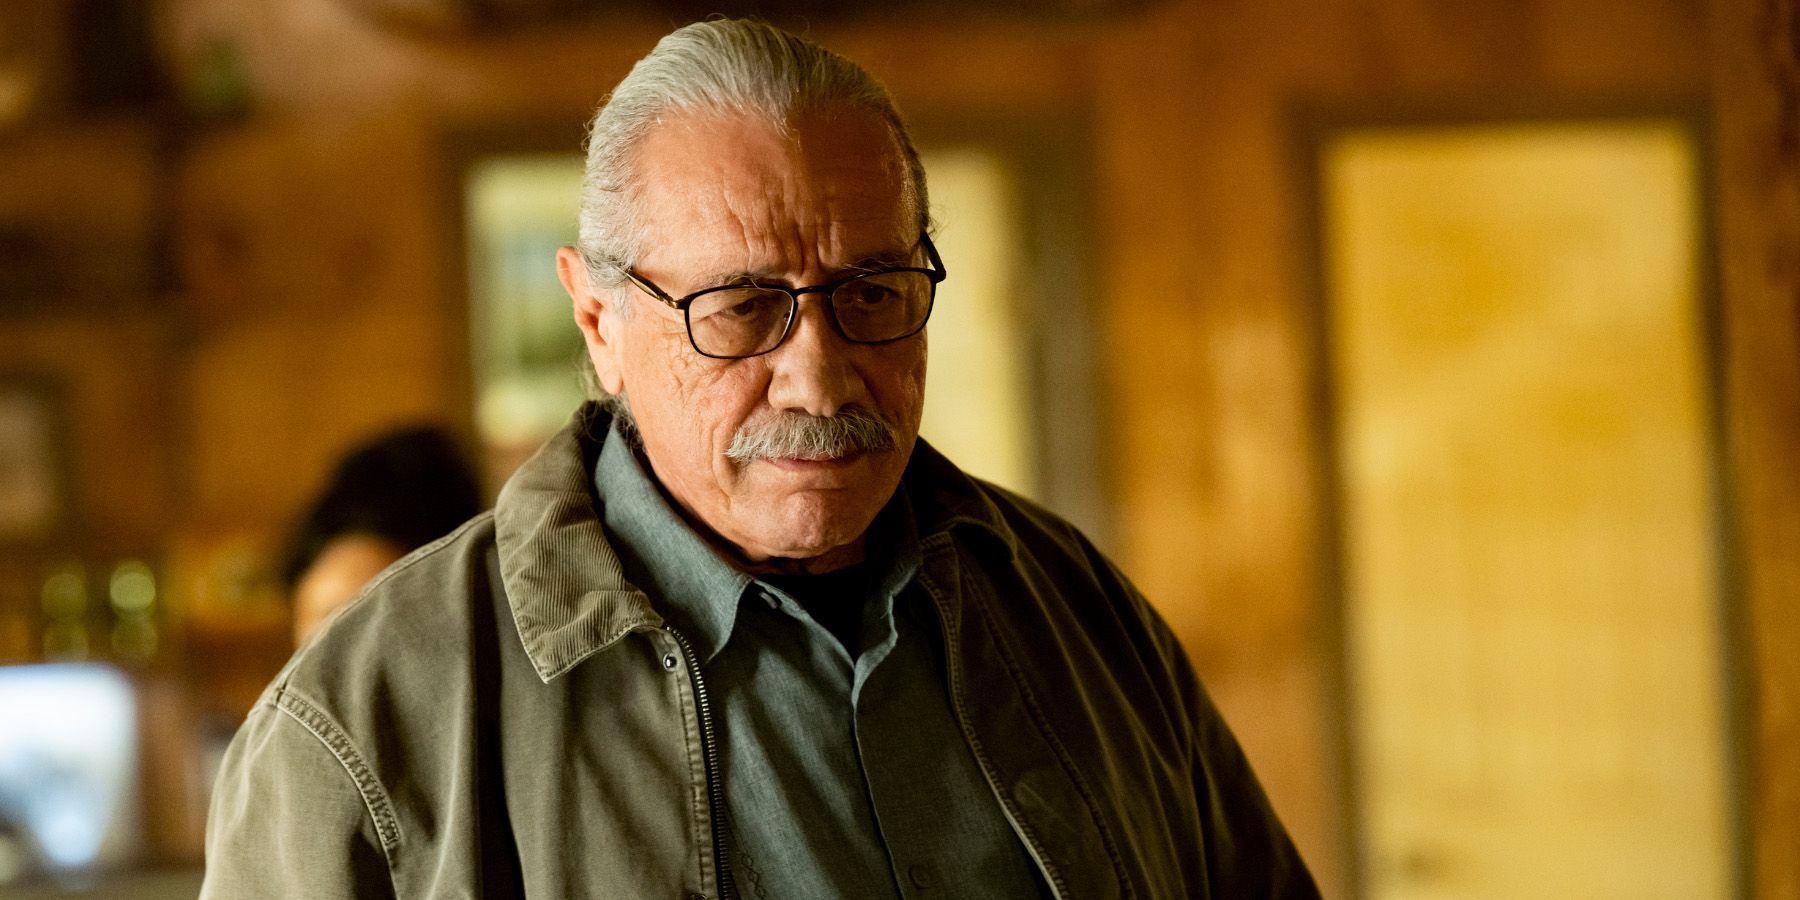 Mayans M.C. Star Edward James Olmos Reveals He Survived Throat Cancer